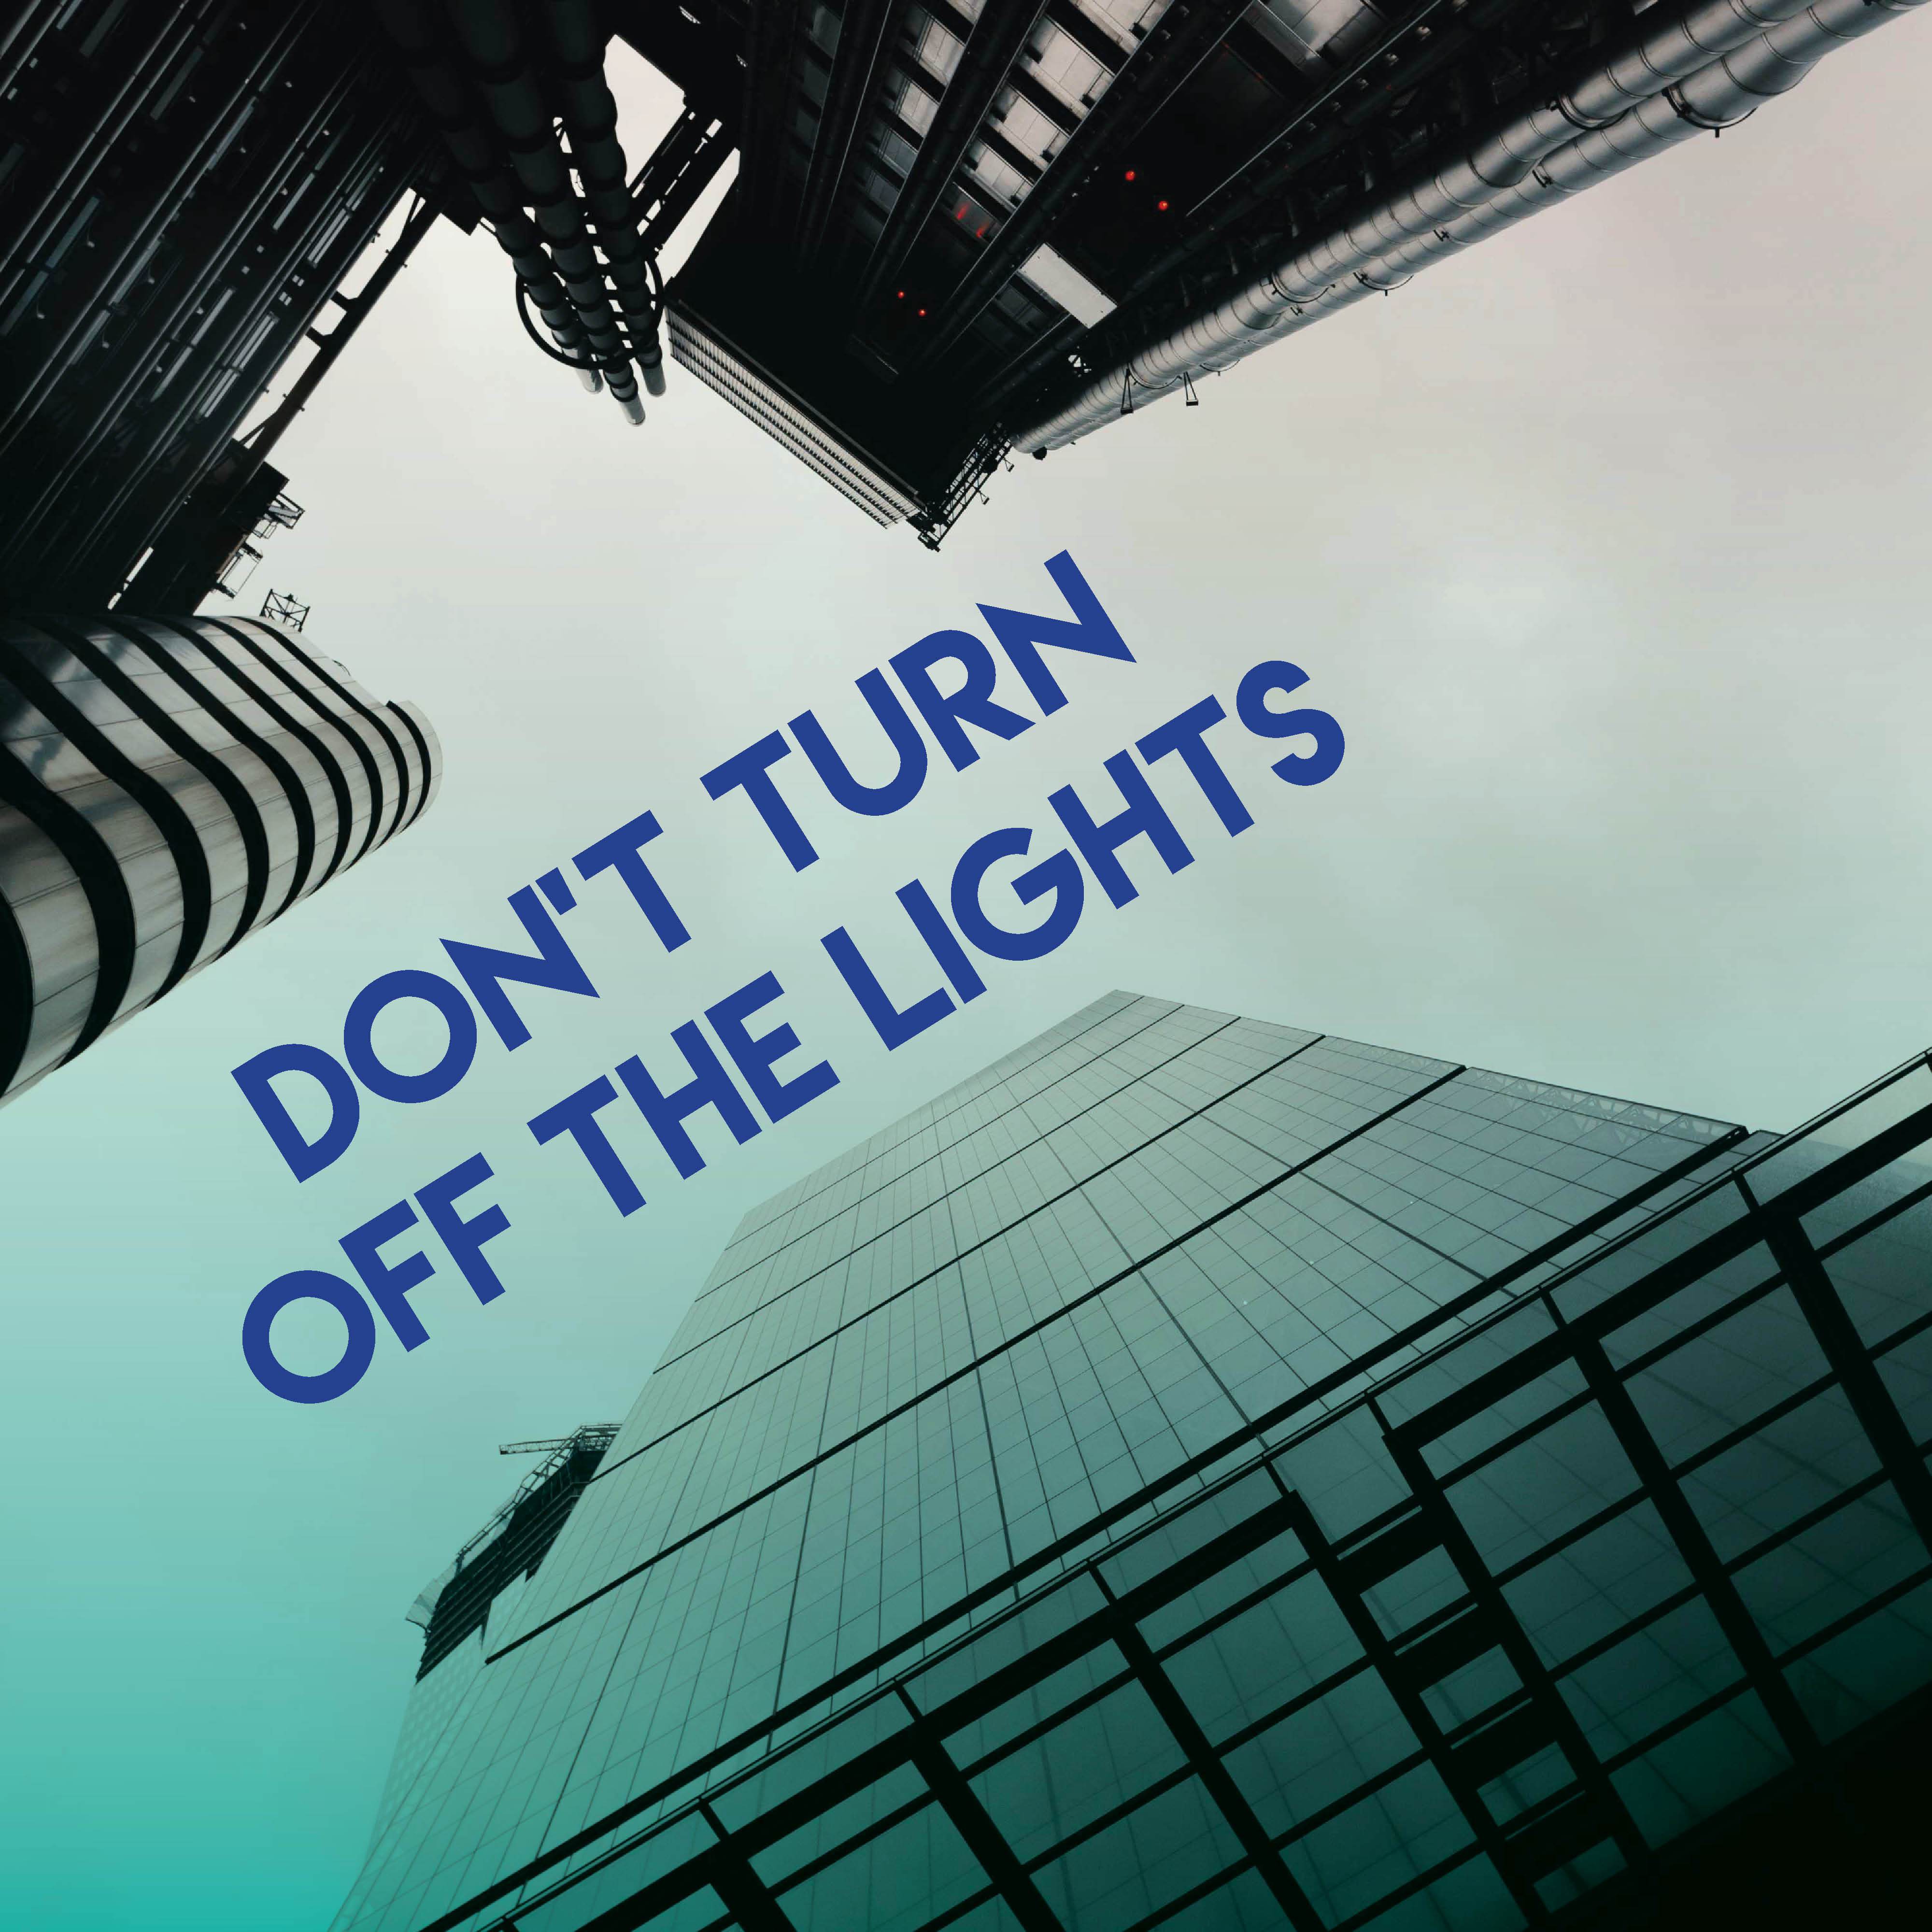 Don't Turn Off the Lights